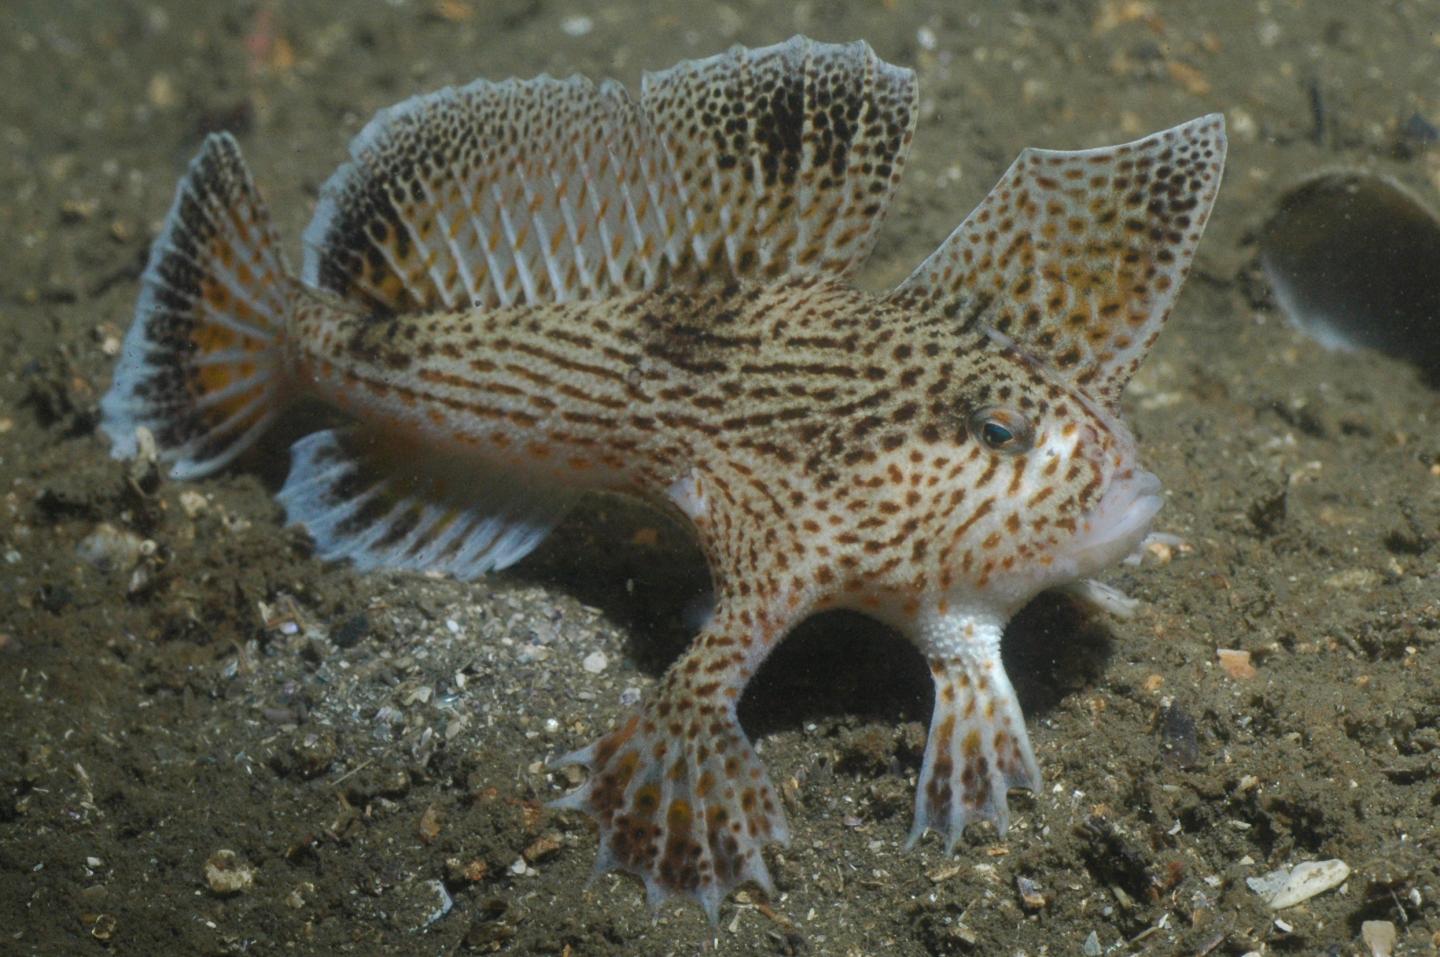 A Spotted Handfish